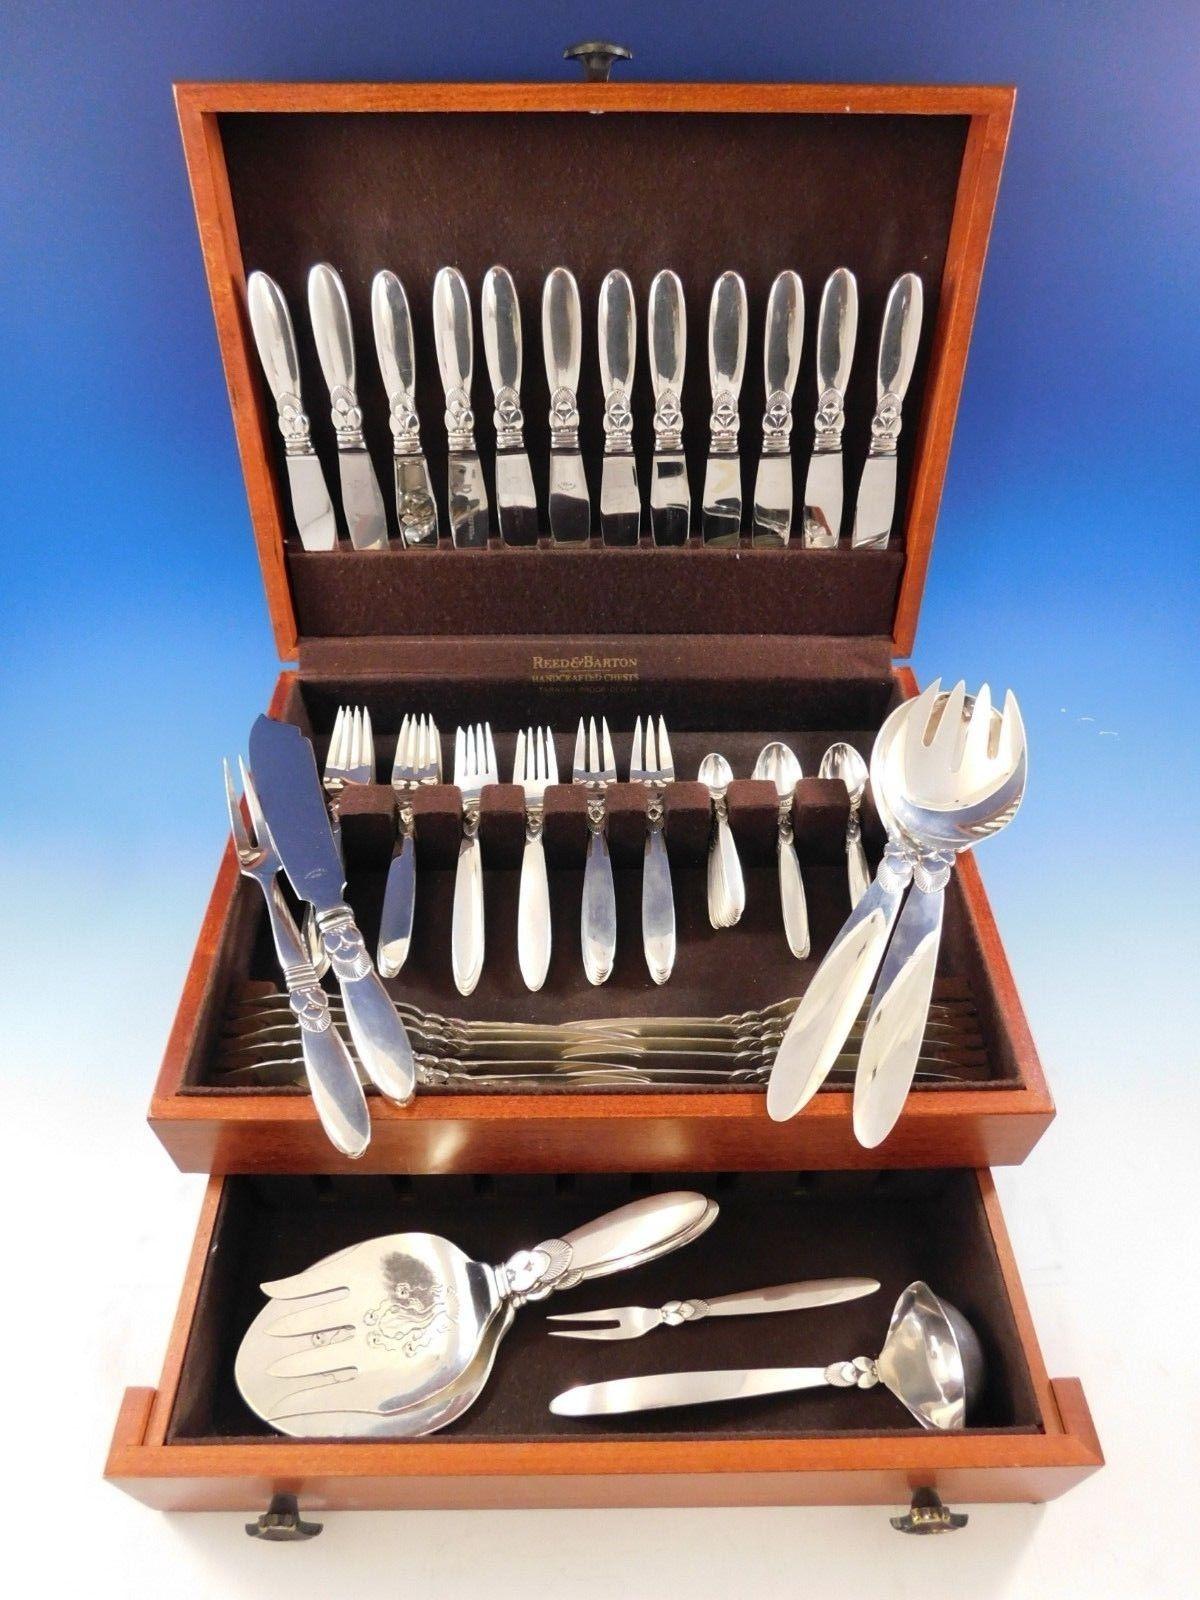 Cactus by Georg Jensen Danish sterling silver flatware set of 92 pieces. This set includes:

12 knives, long handle, 8